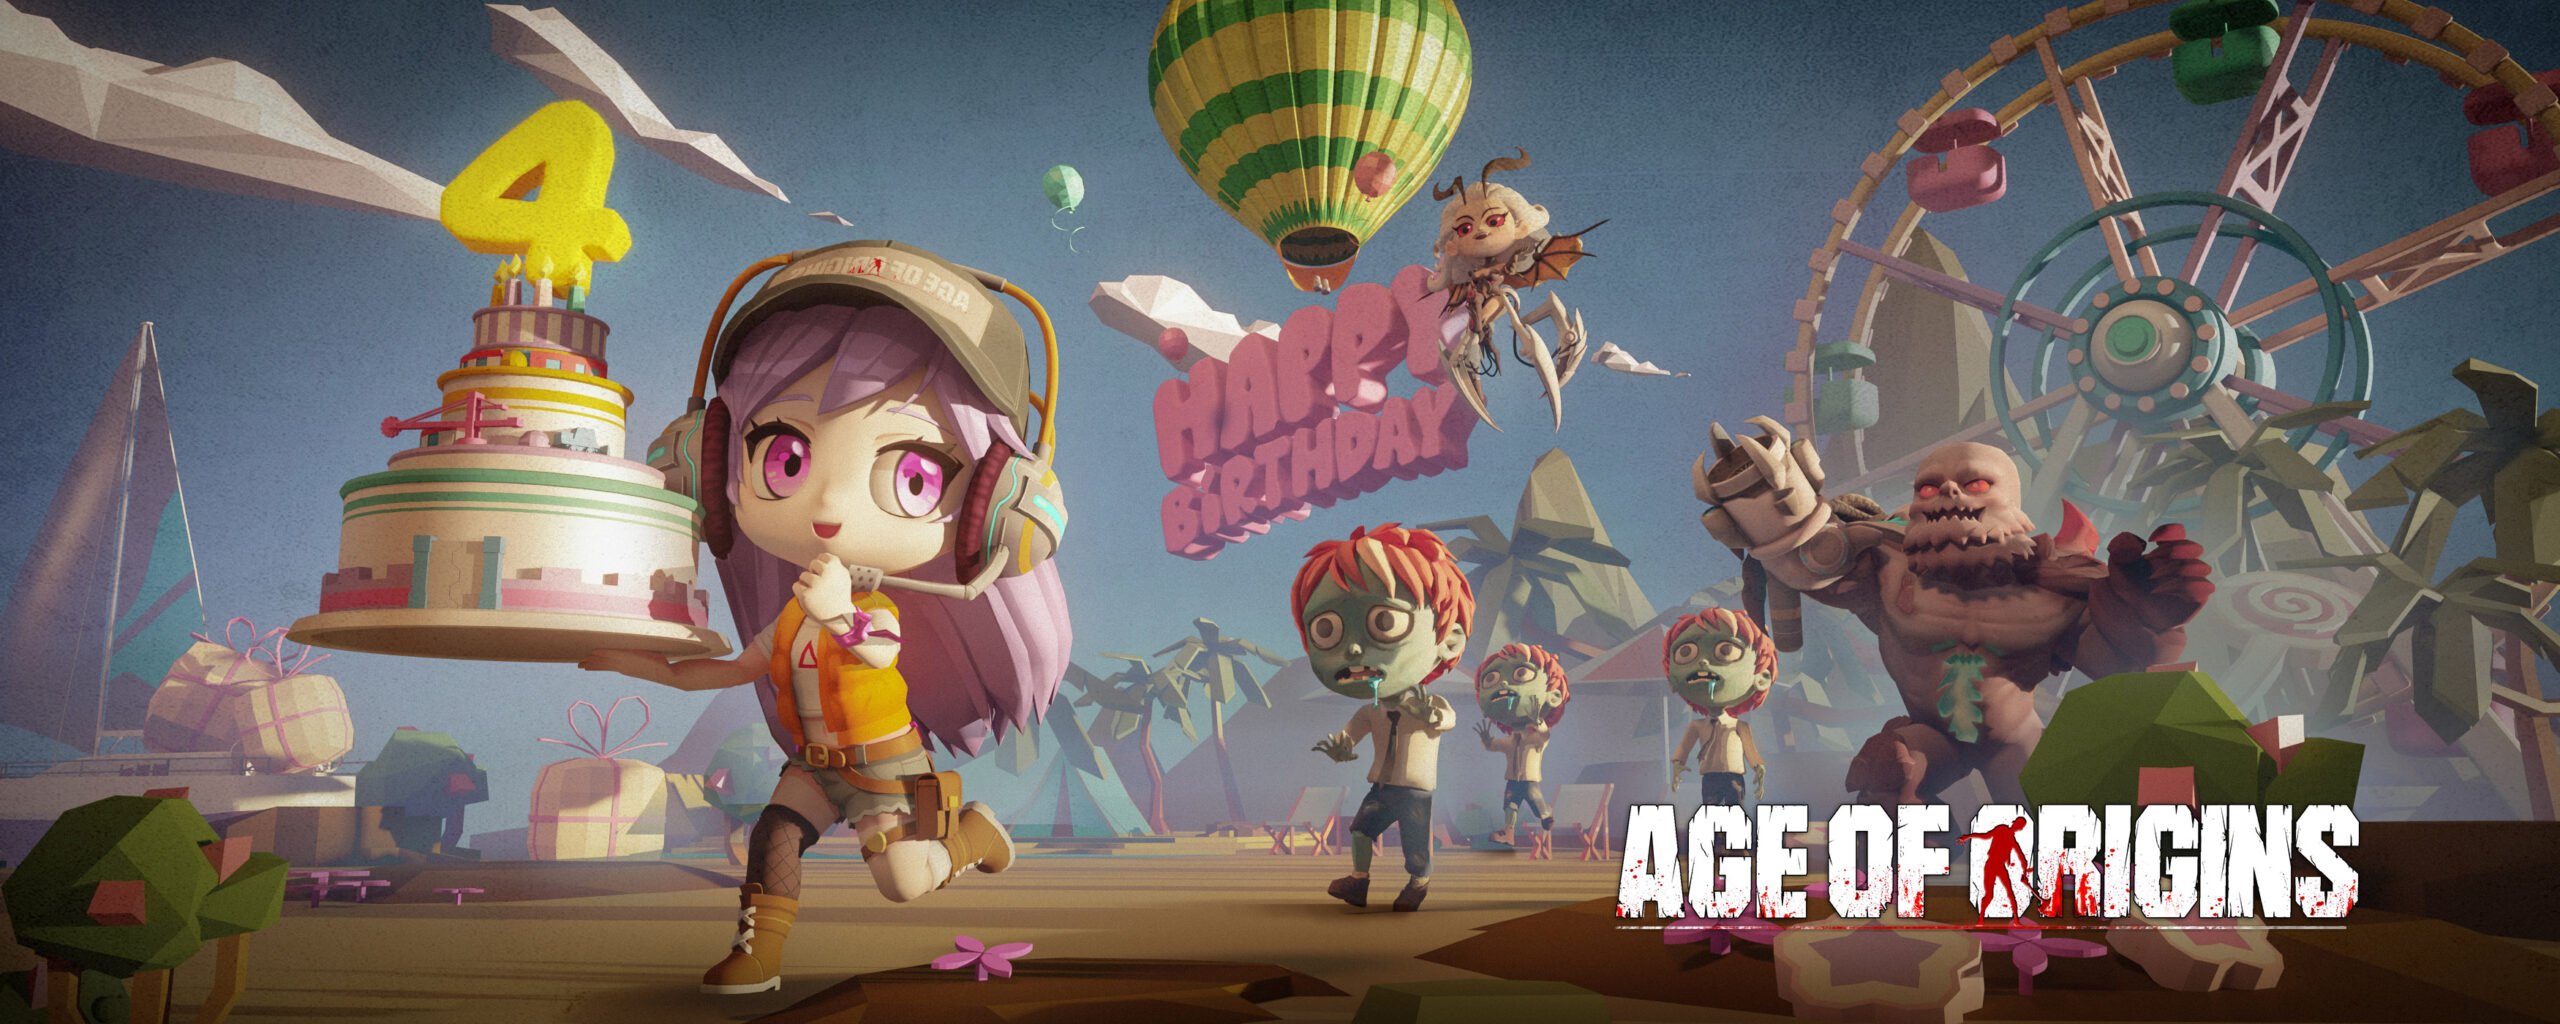 Age of Origins Gets a Host of New Events to Celebrate Its 4th Anniversary